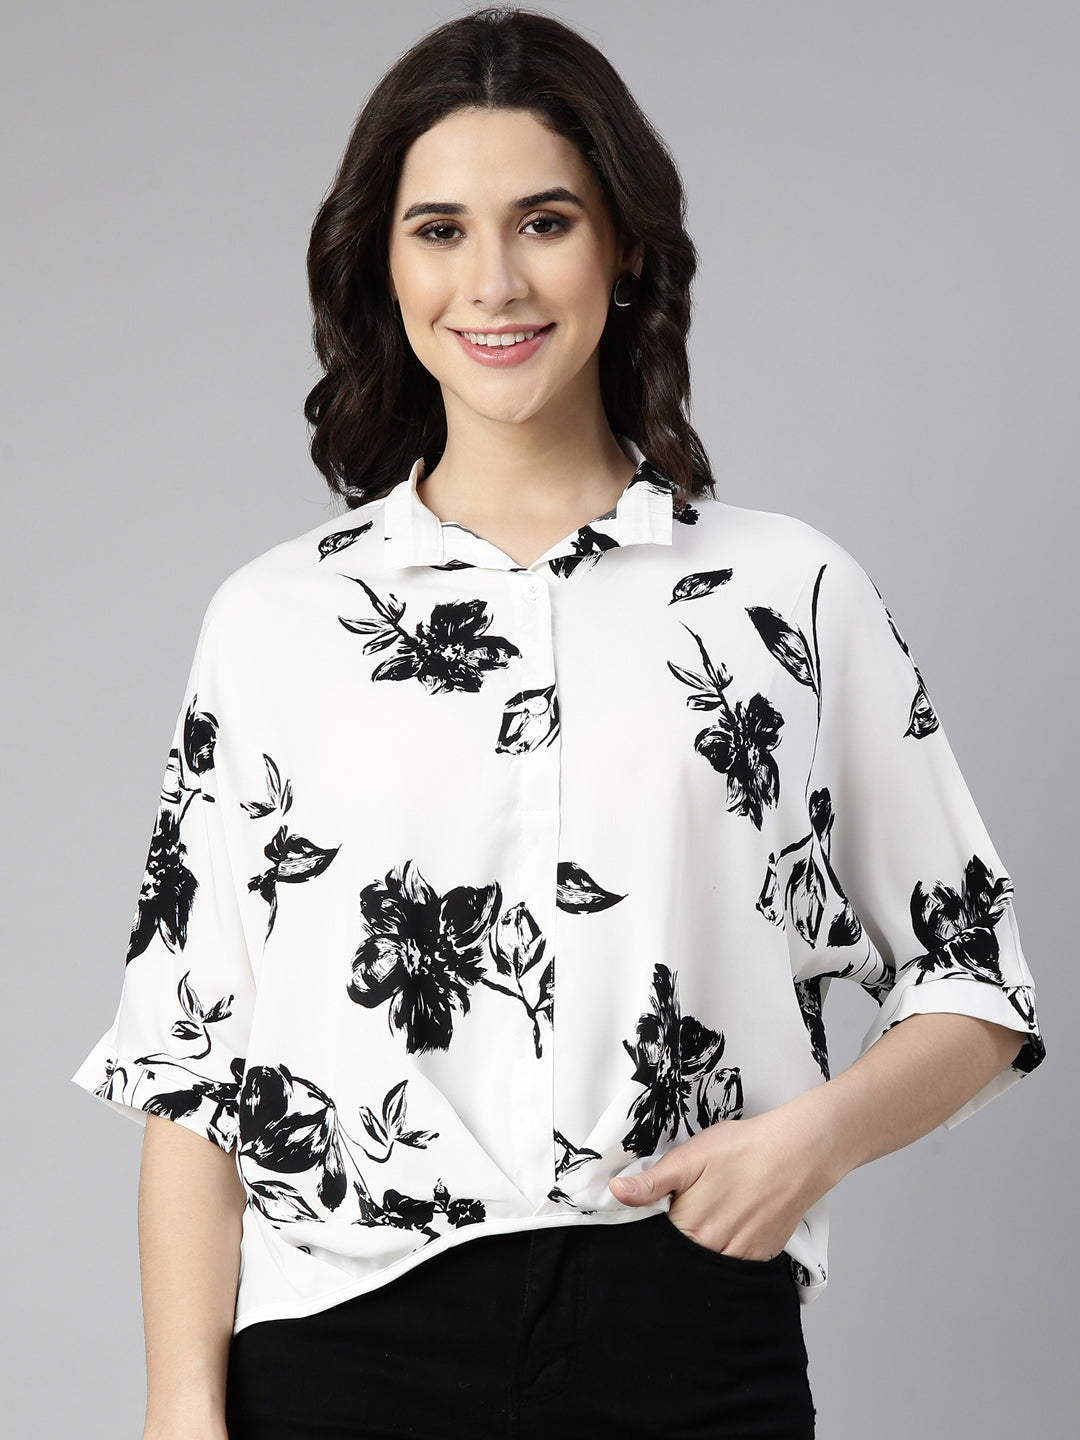 Women Floral Shirt Style White Over Sized Top